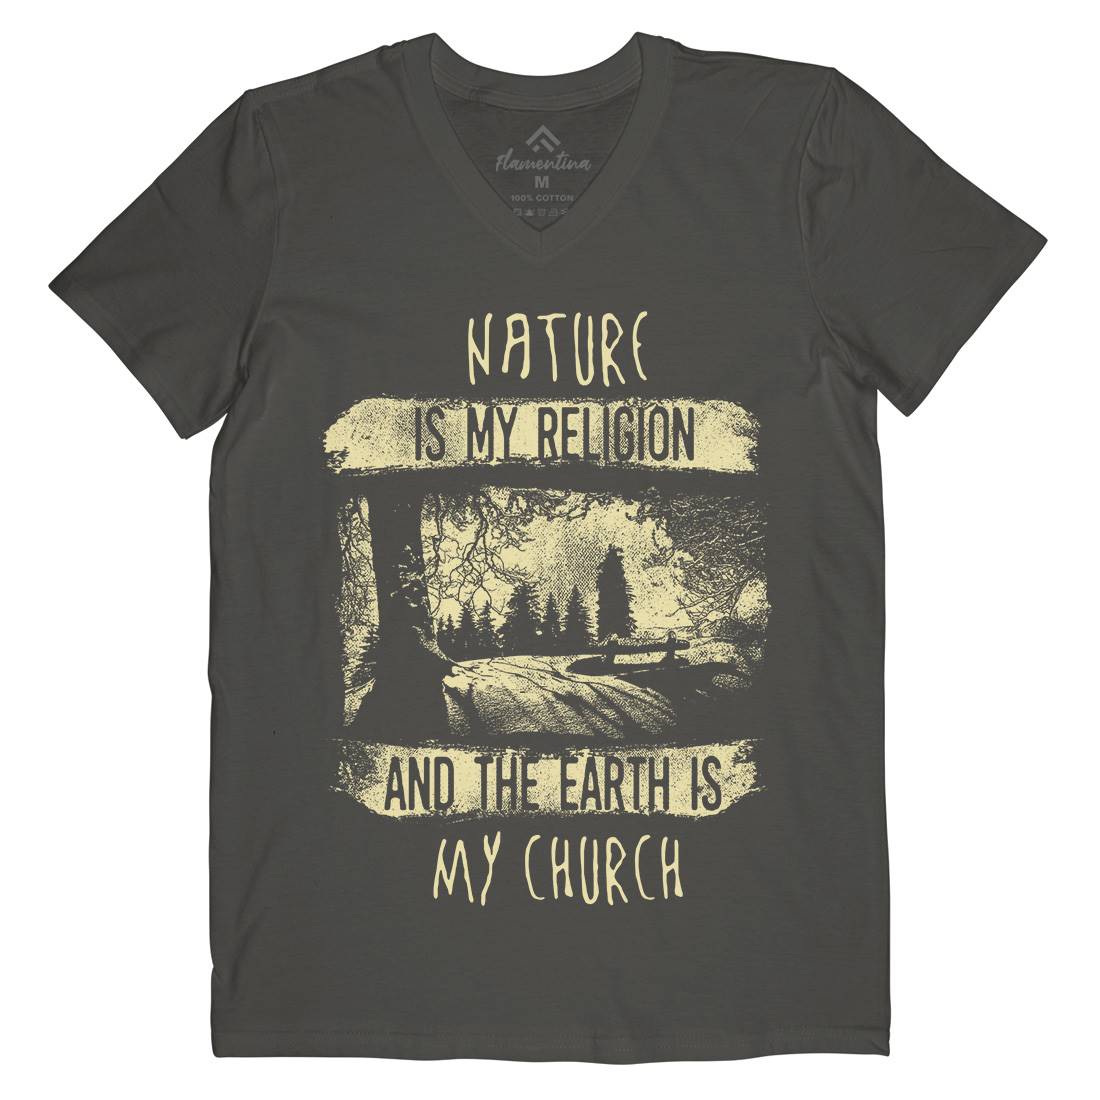 Is My Religion Mens V-Neck T-Shirt Nature C967